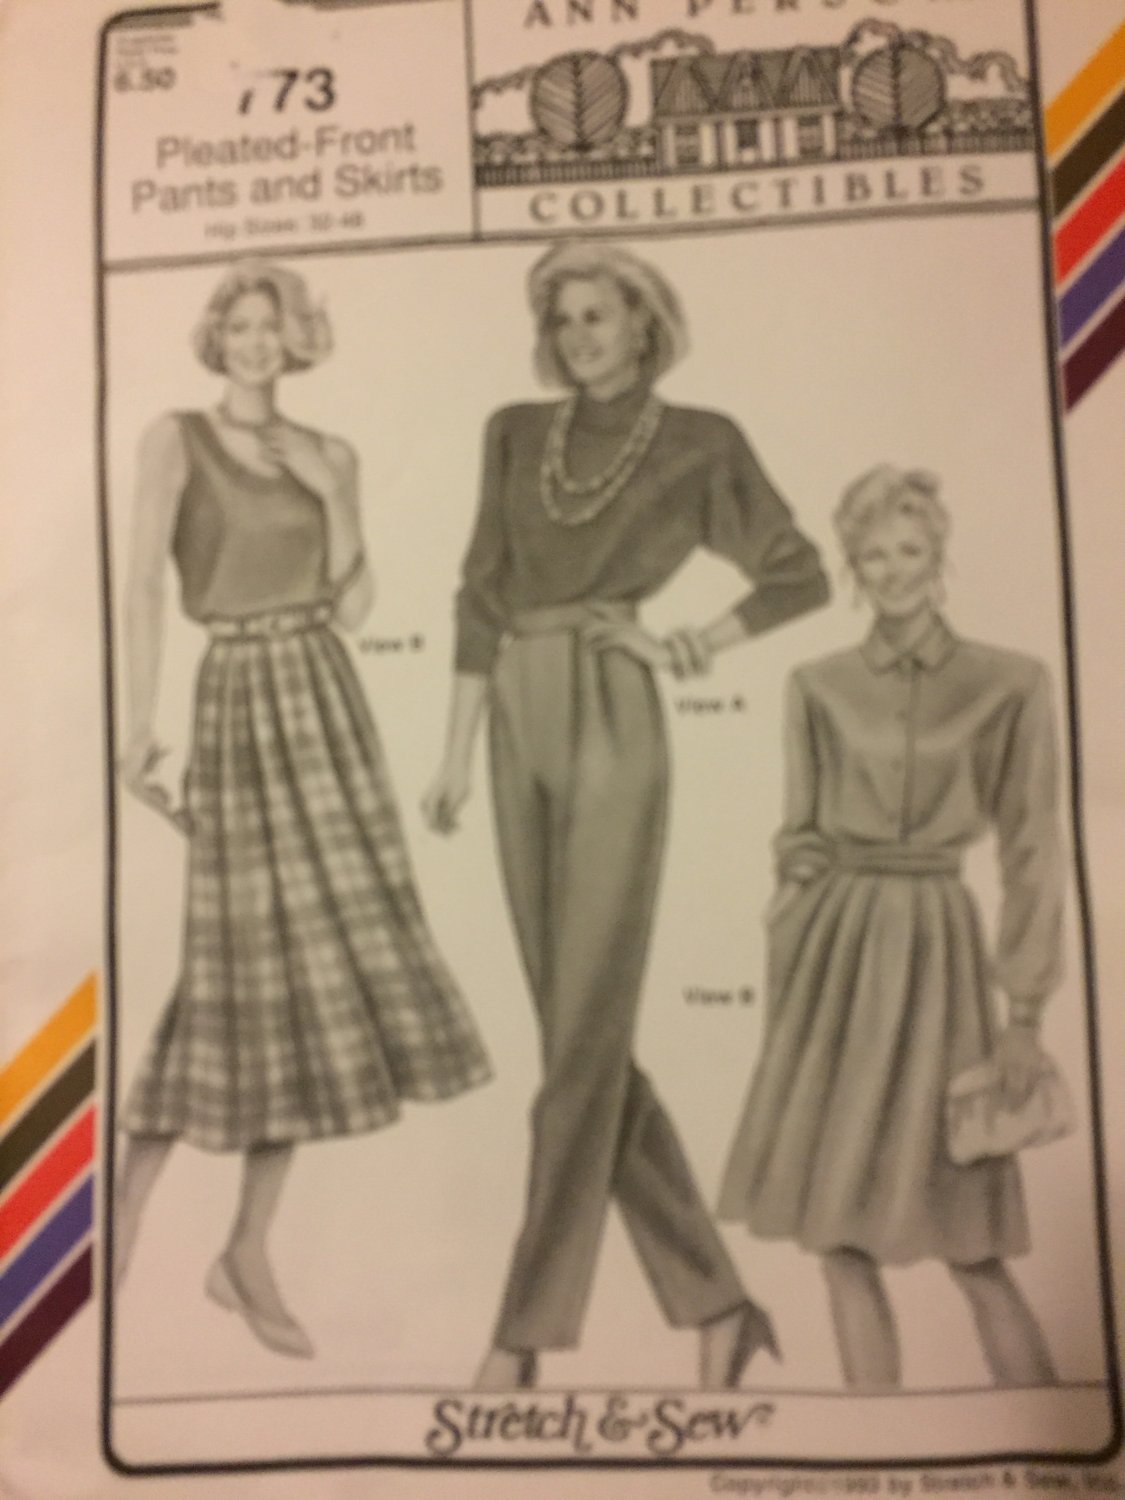 Stretch and Sew 773 pants and skirt  Ann Person knit fabrics Sewing Pattern Hip sizes 32 - 48